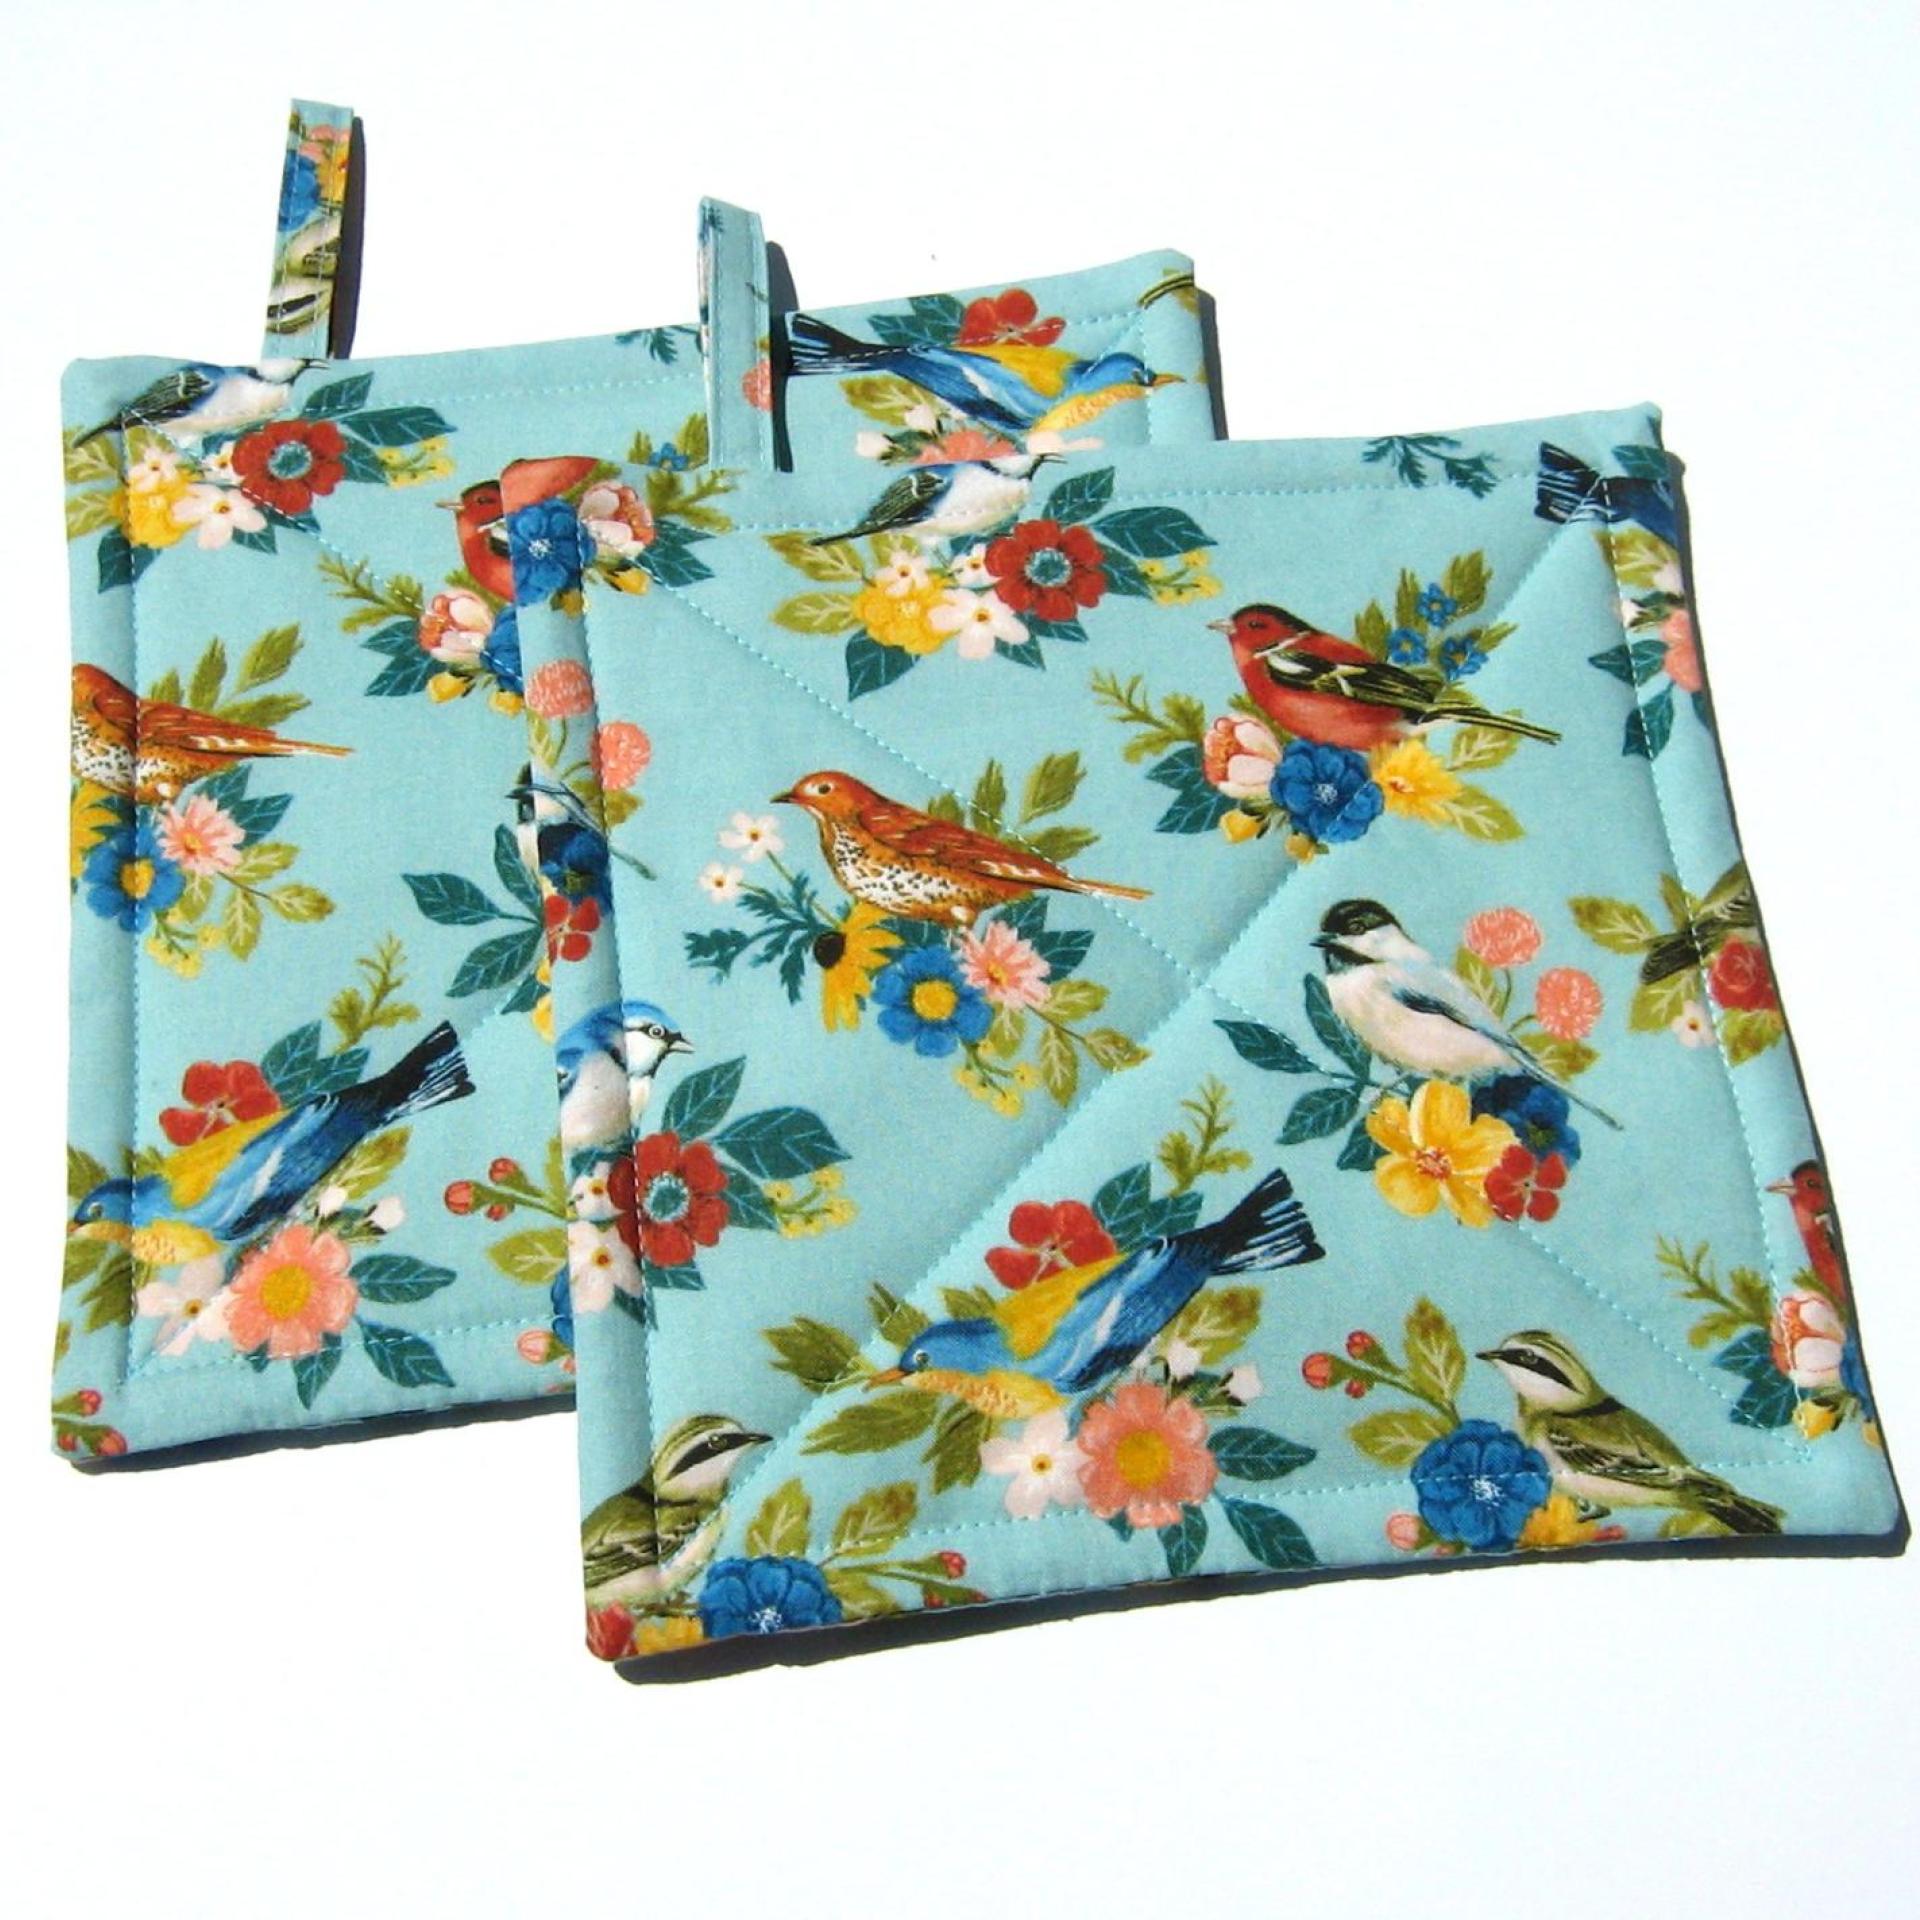 Summer Birds Potholders, Colorful Birds and Bunches of Flowers, Quilted Hot Pads, USA Made Housewarming, Hostess Gift